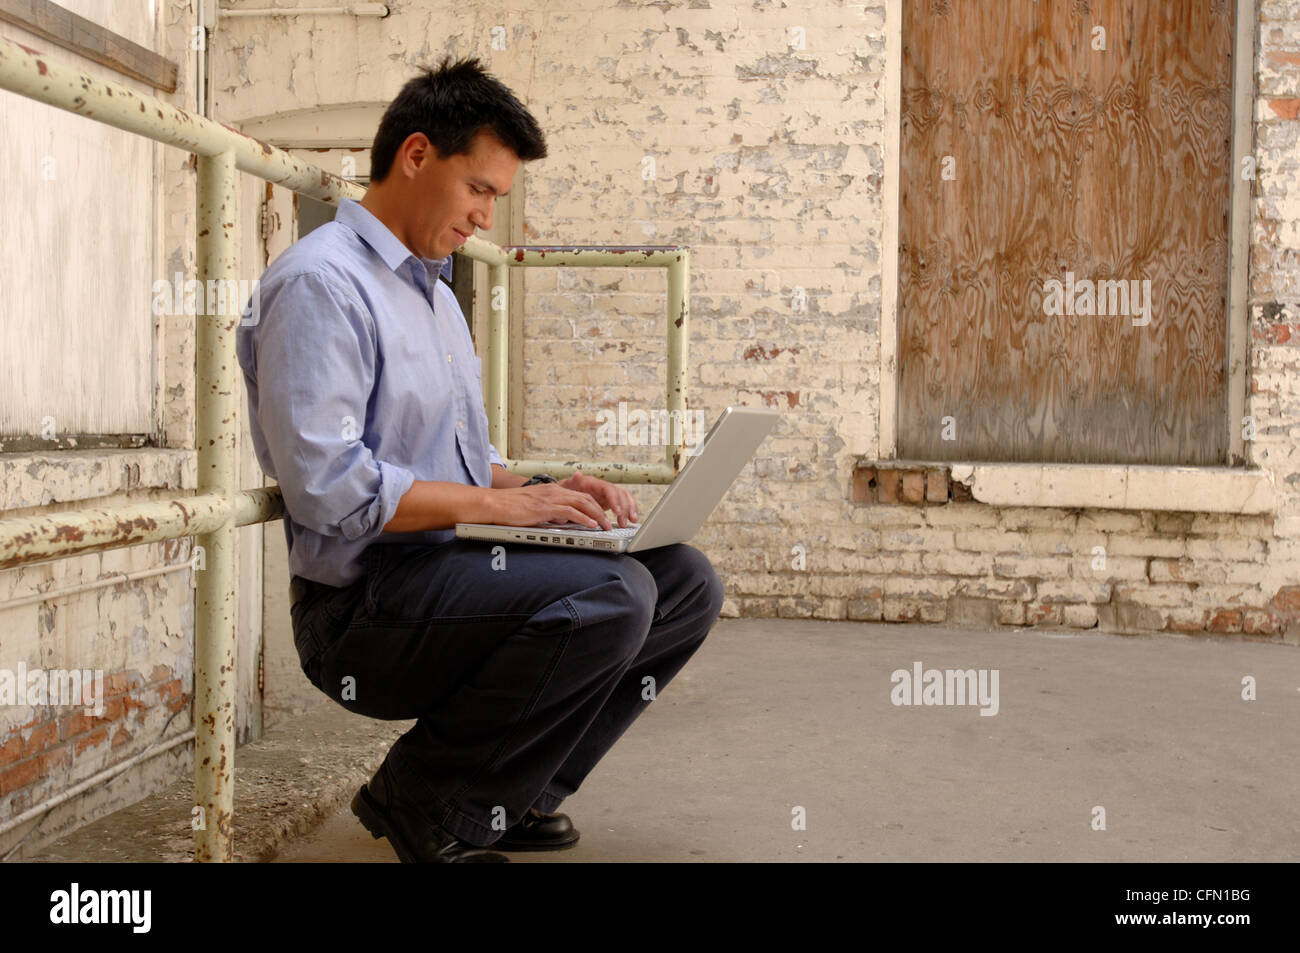 Man Using Laptop in Alley Stock Photo